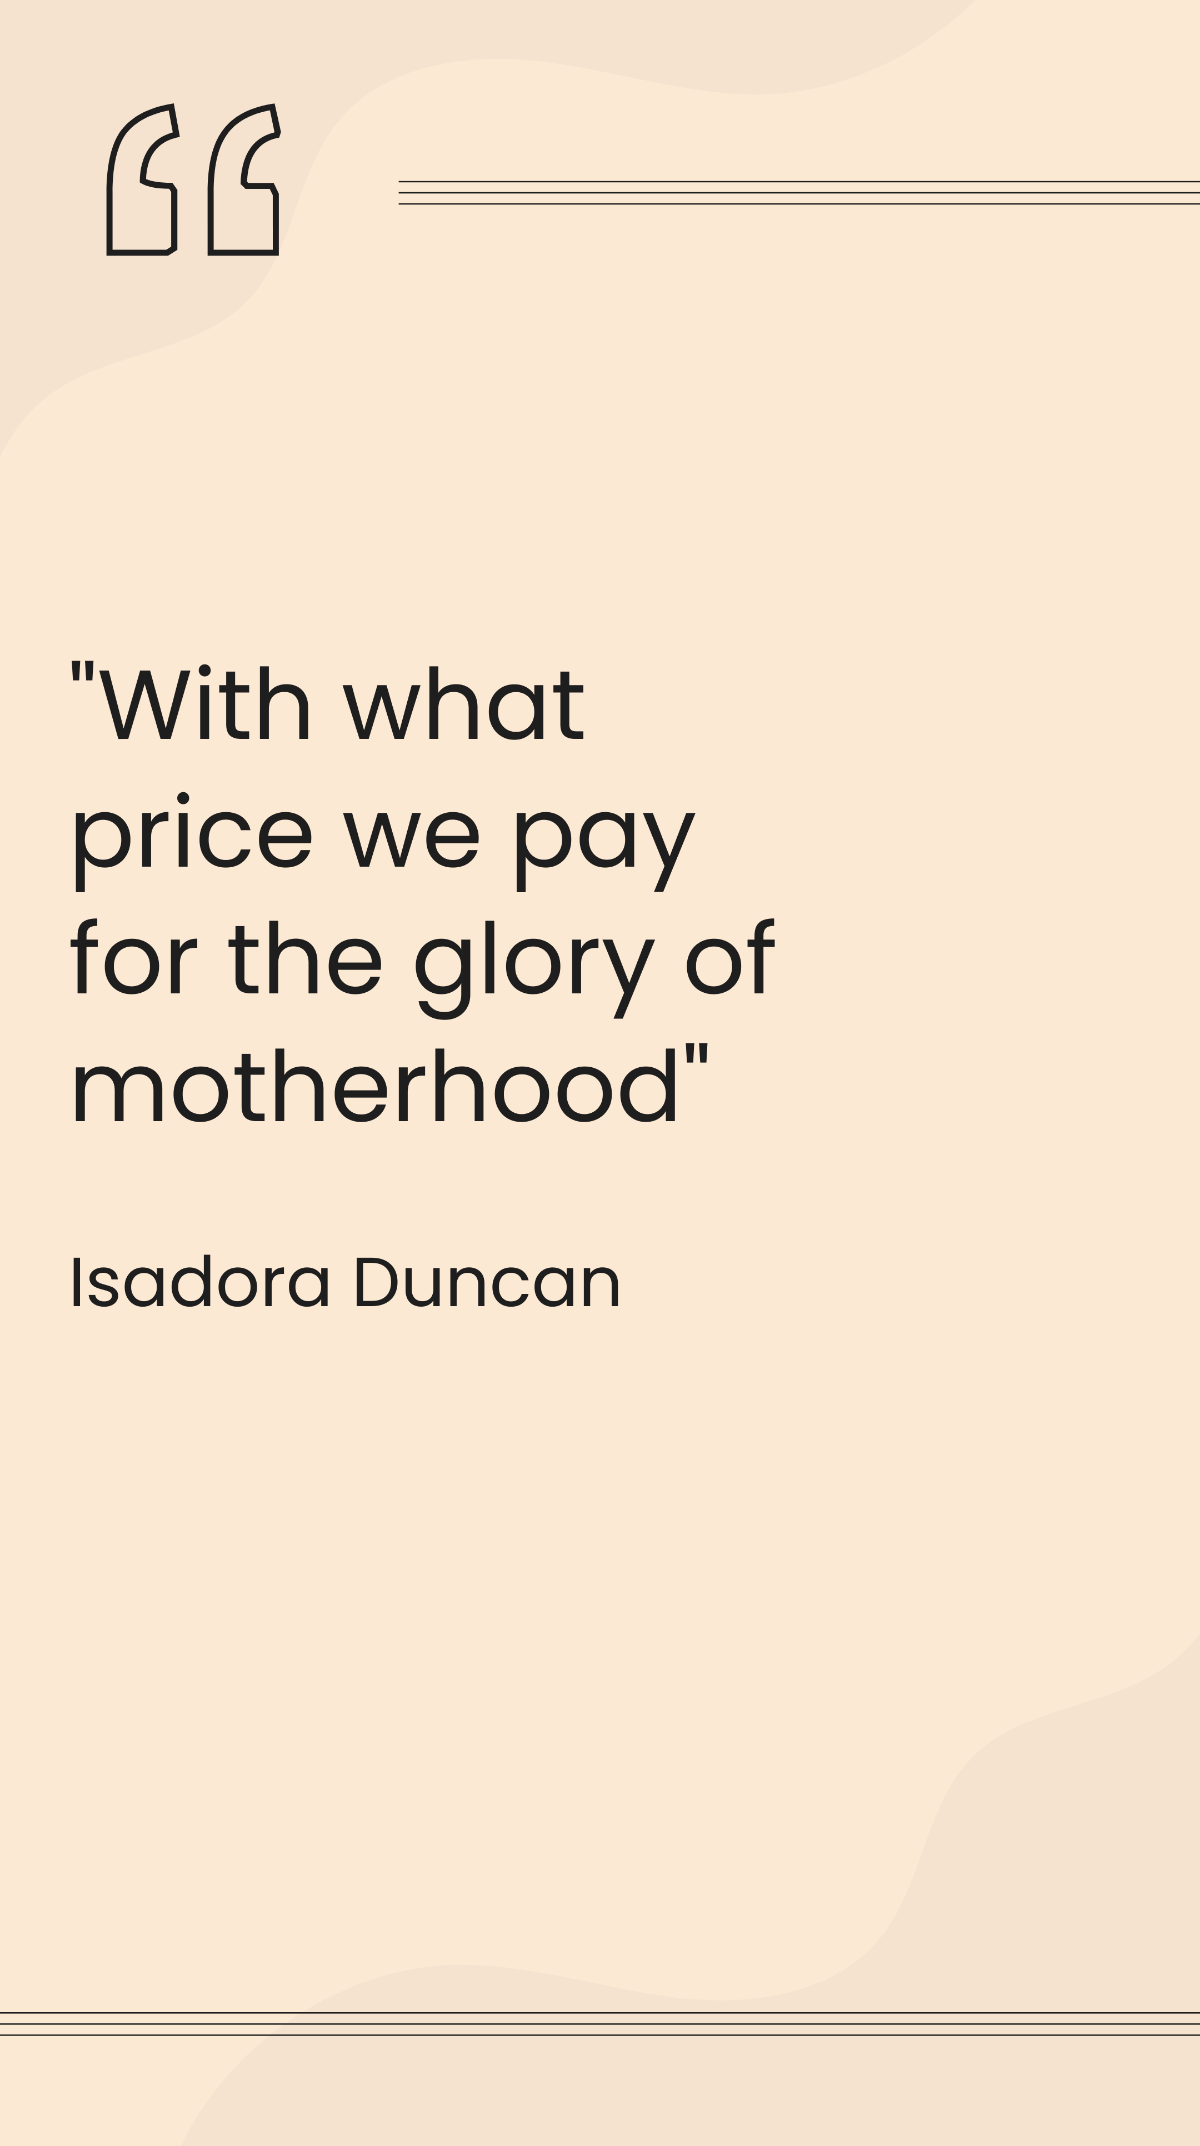 Isadora Duncan - With what price we pay for the glory of motherhood.  Template